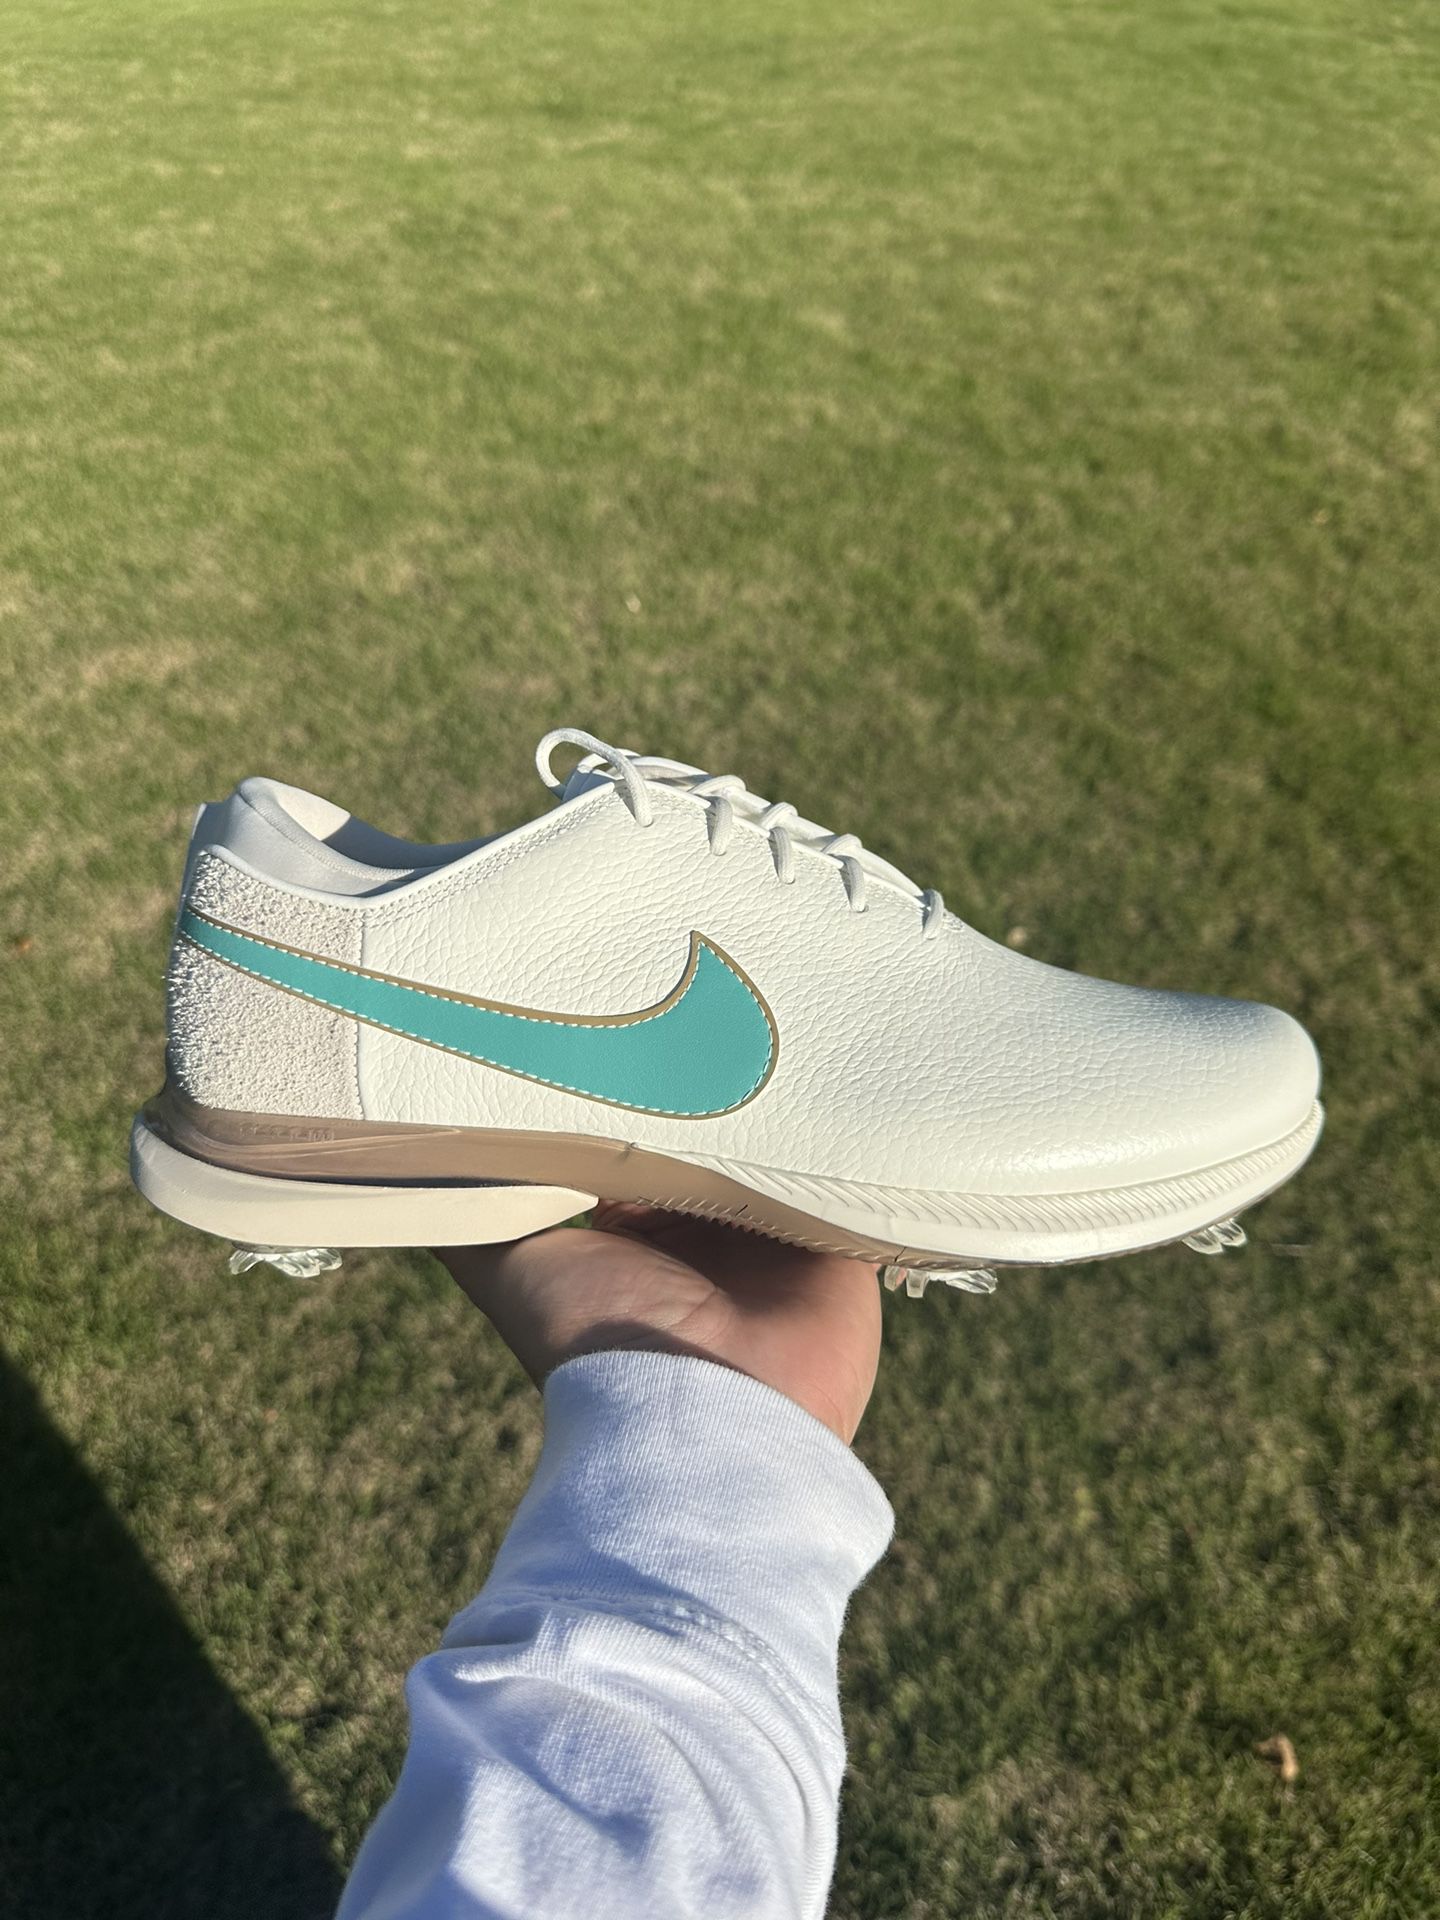 Nike Air Zoom Victory Tour 2 Golf Shoes Spikes White Teal DM9930-141 Size 10.5